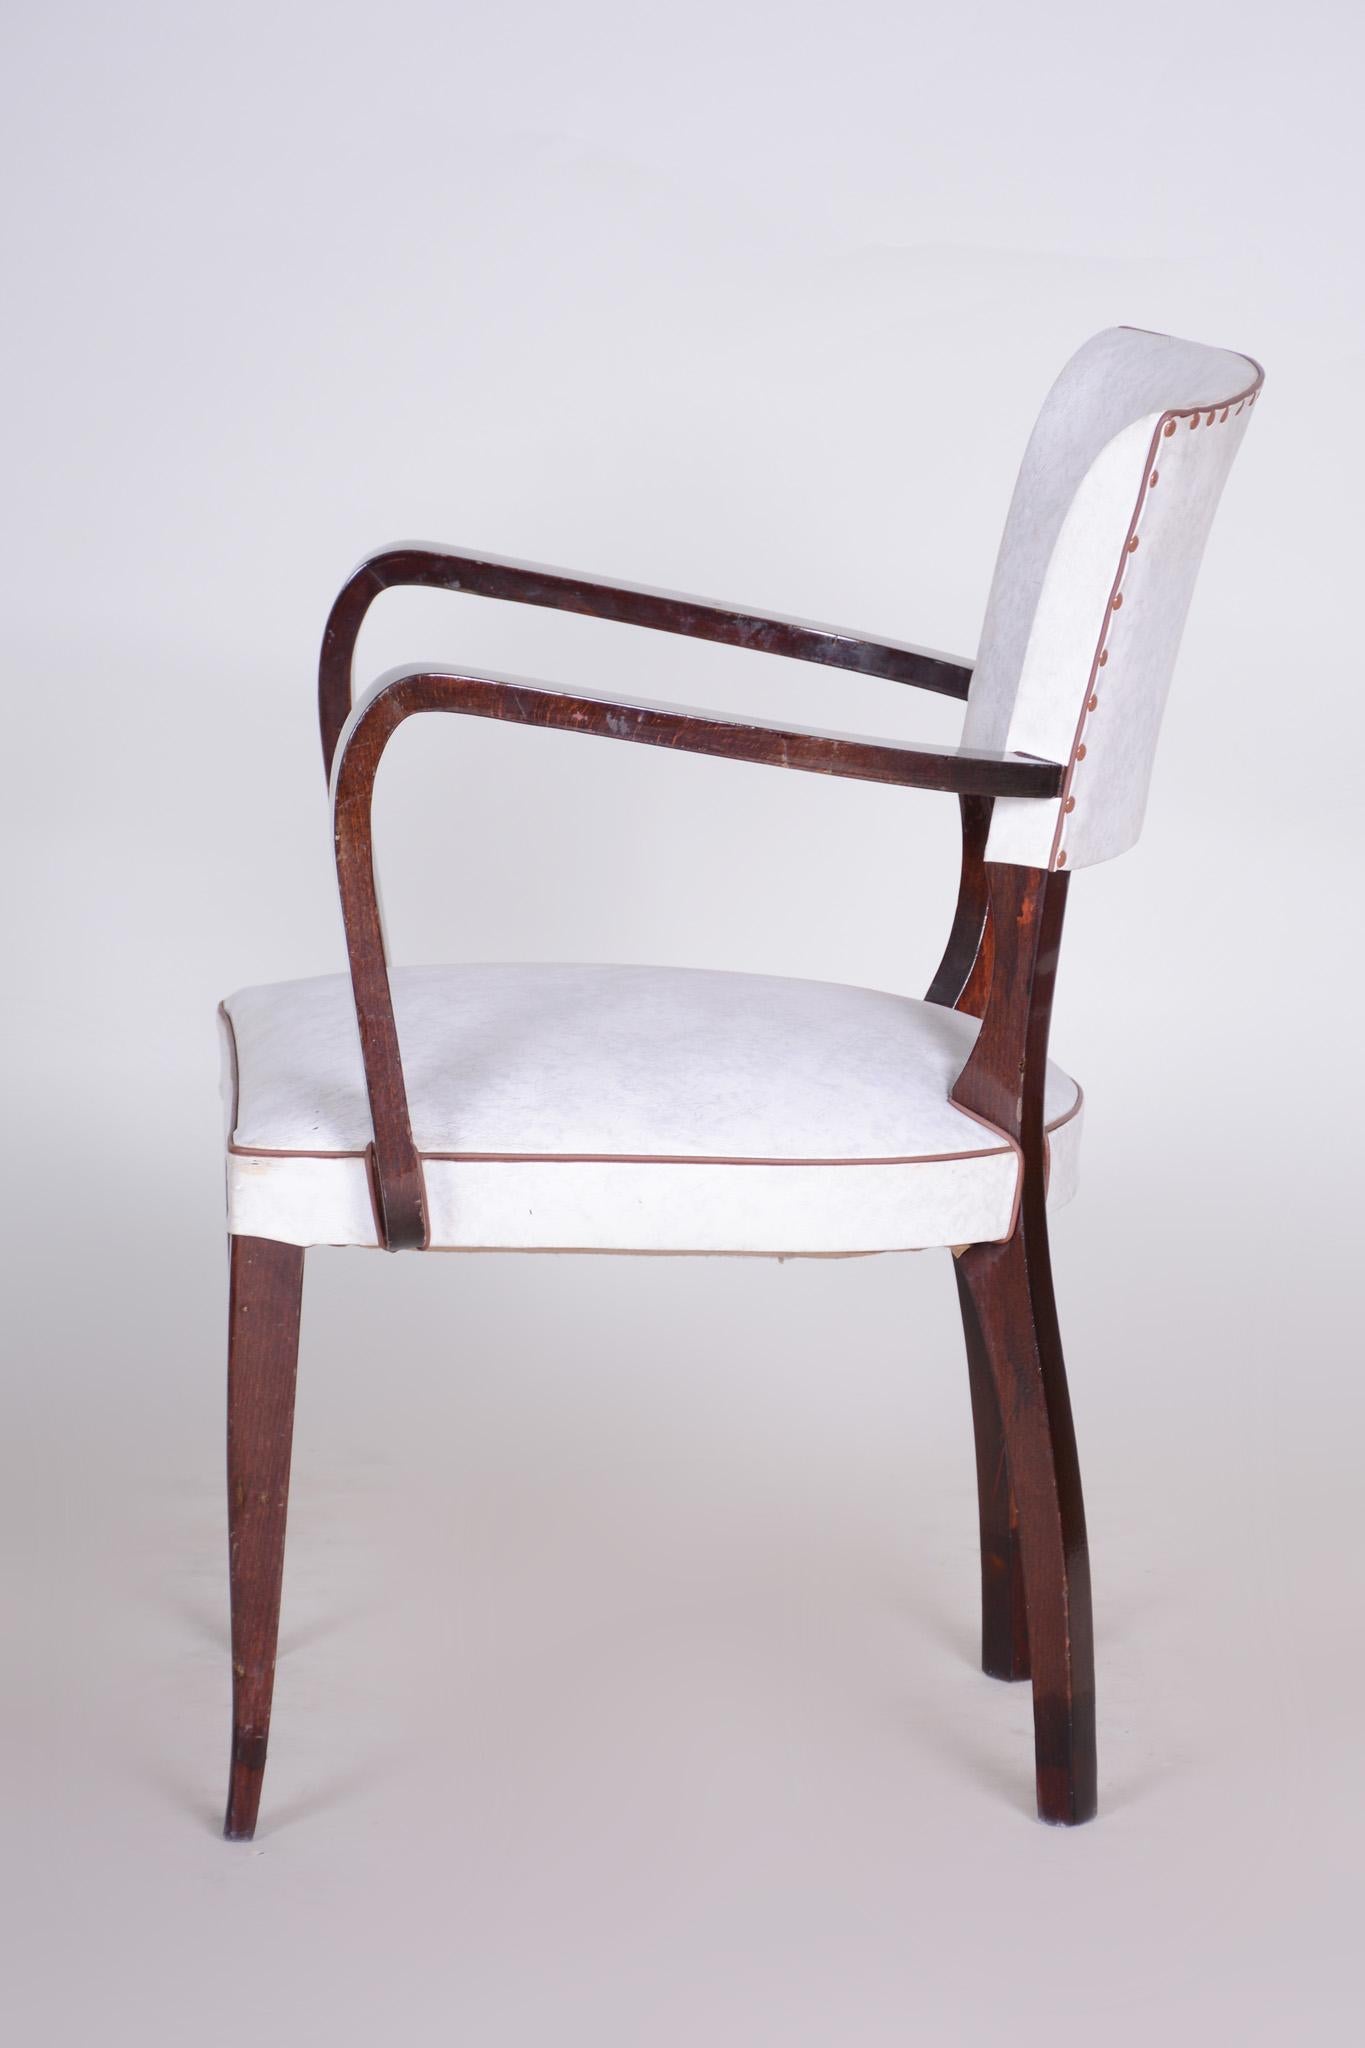 Faux Leather Restored White Armchair Made in France 1930, Upholstered with Artificial Leather For Sale